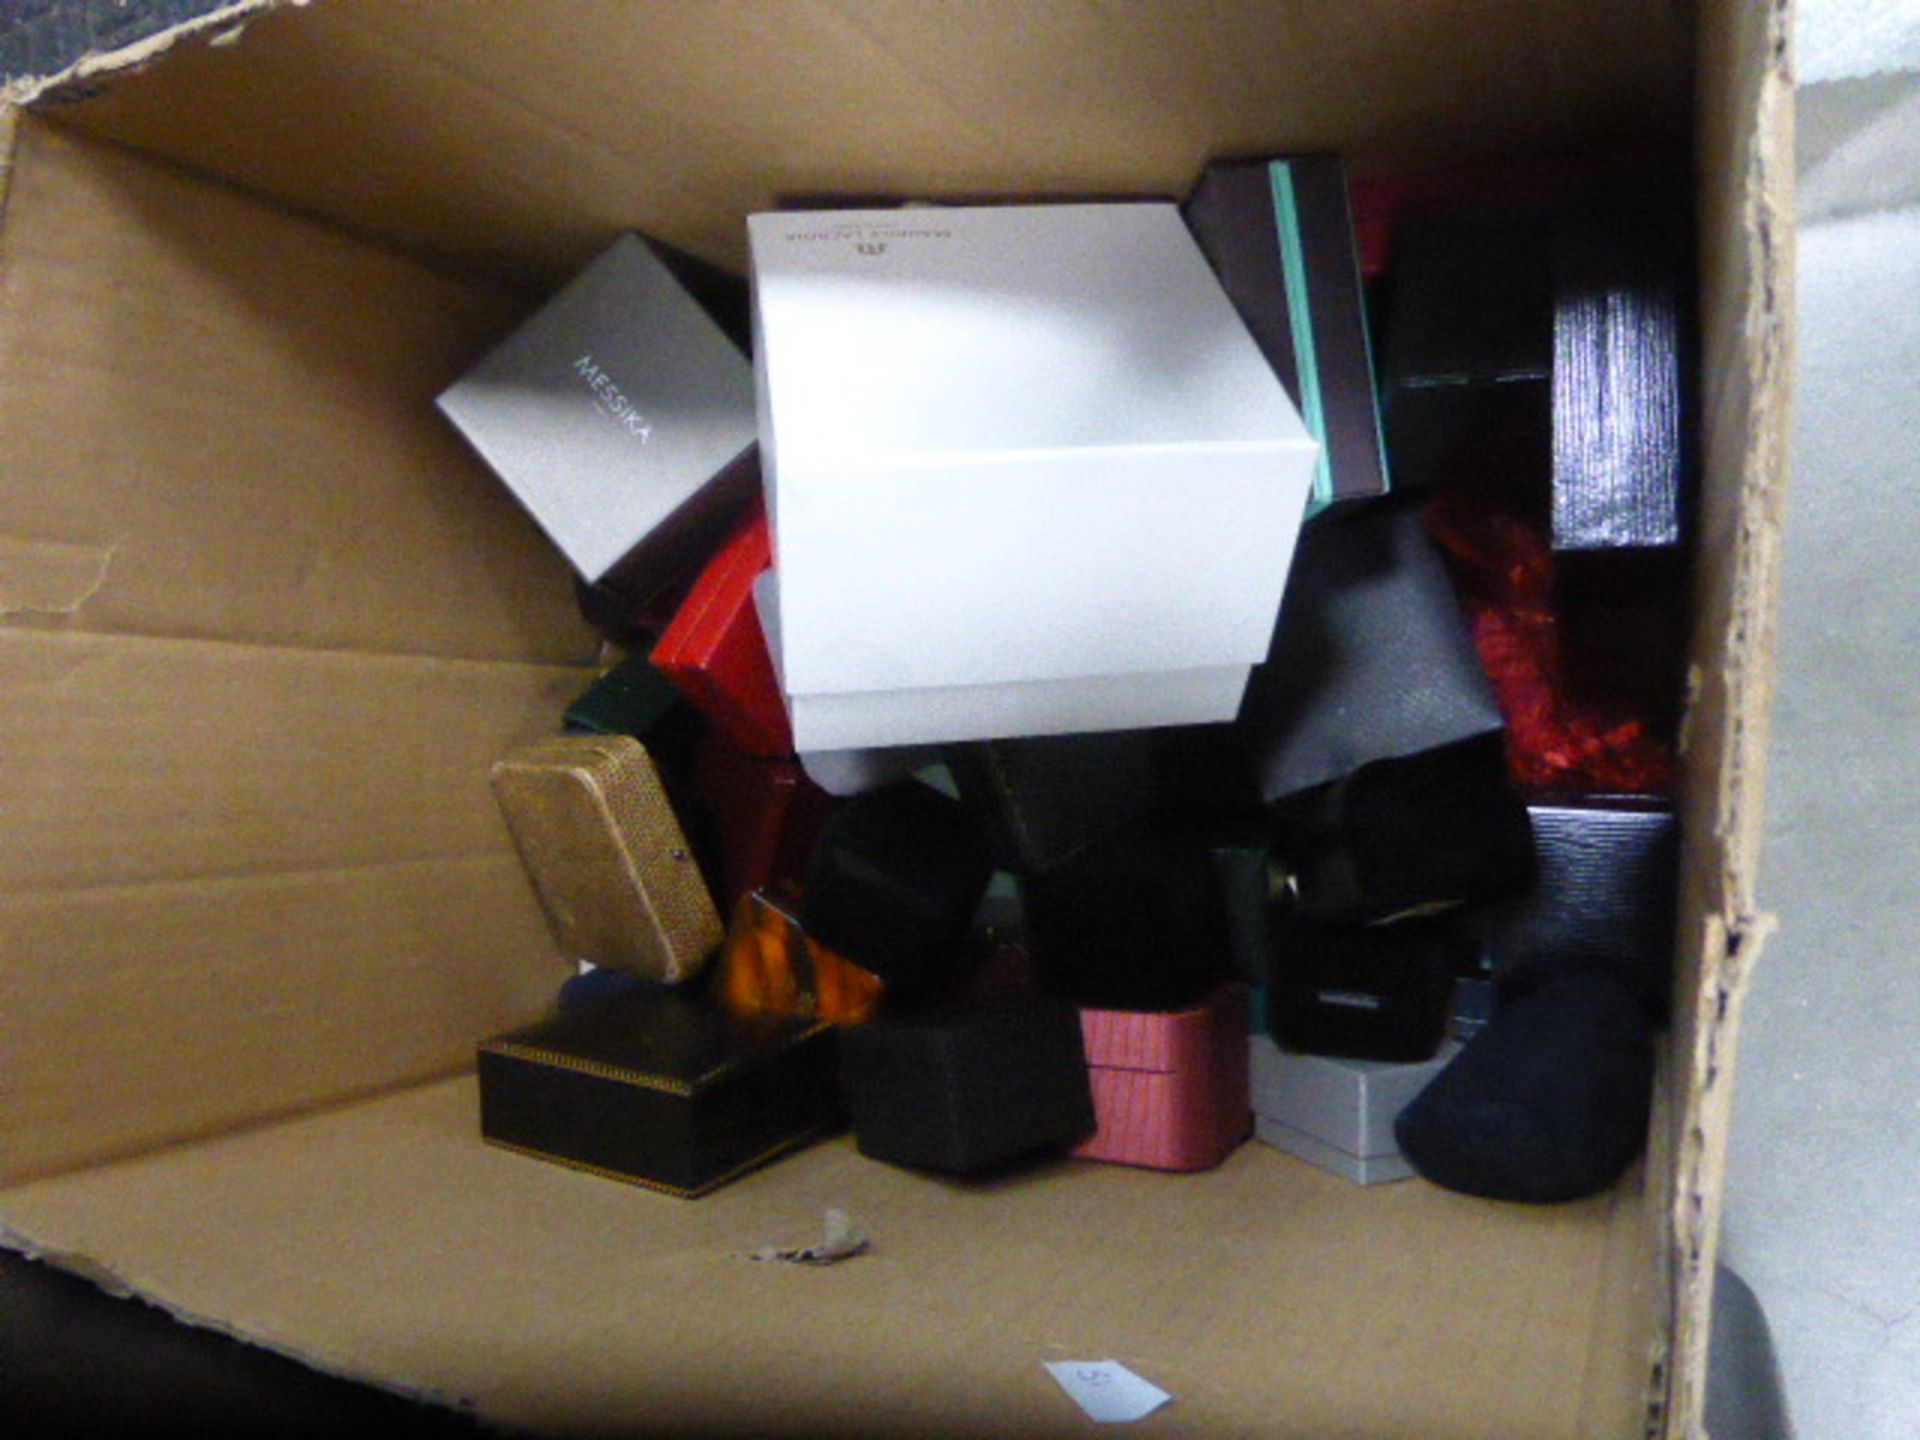 Cardboard box containing loose jewellery boxes, ring cases and watch boxes